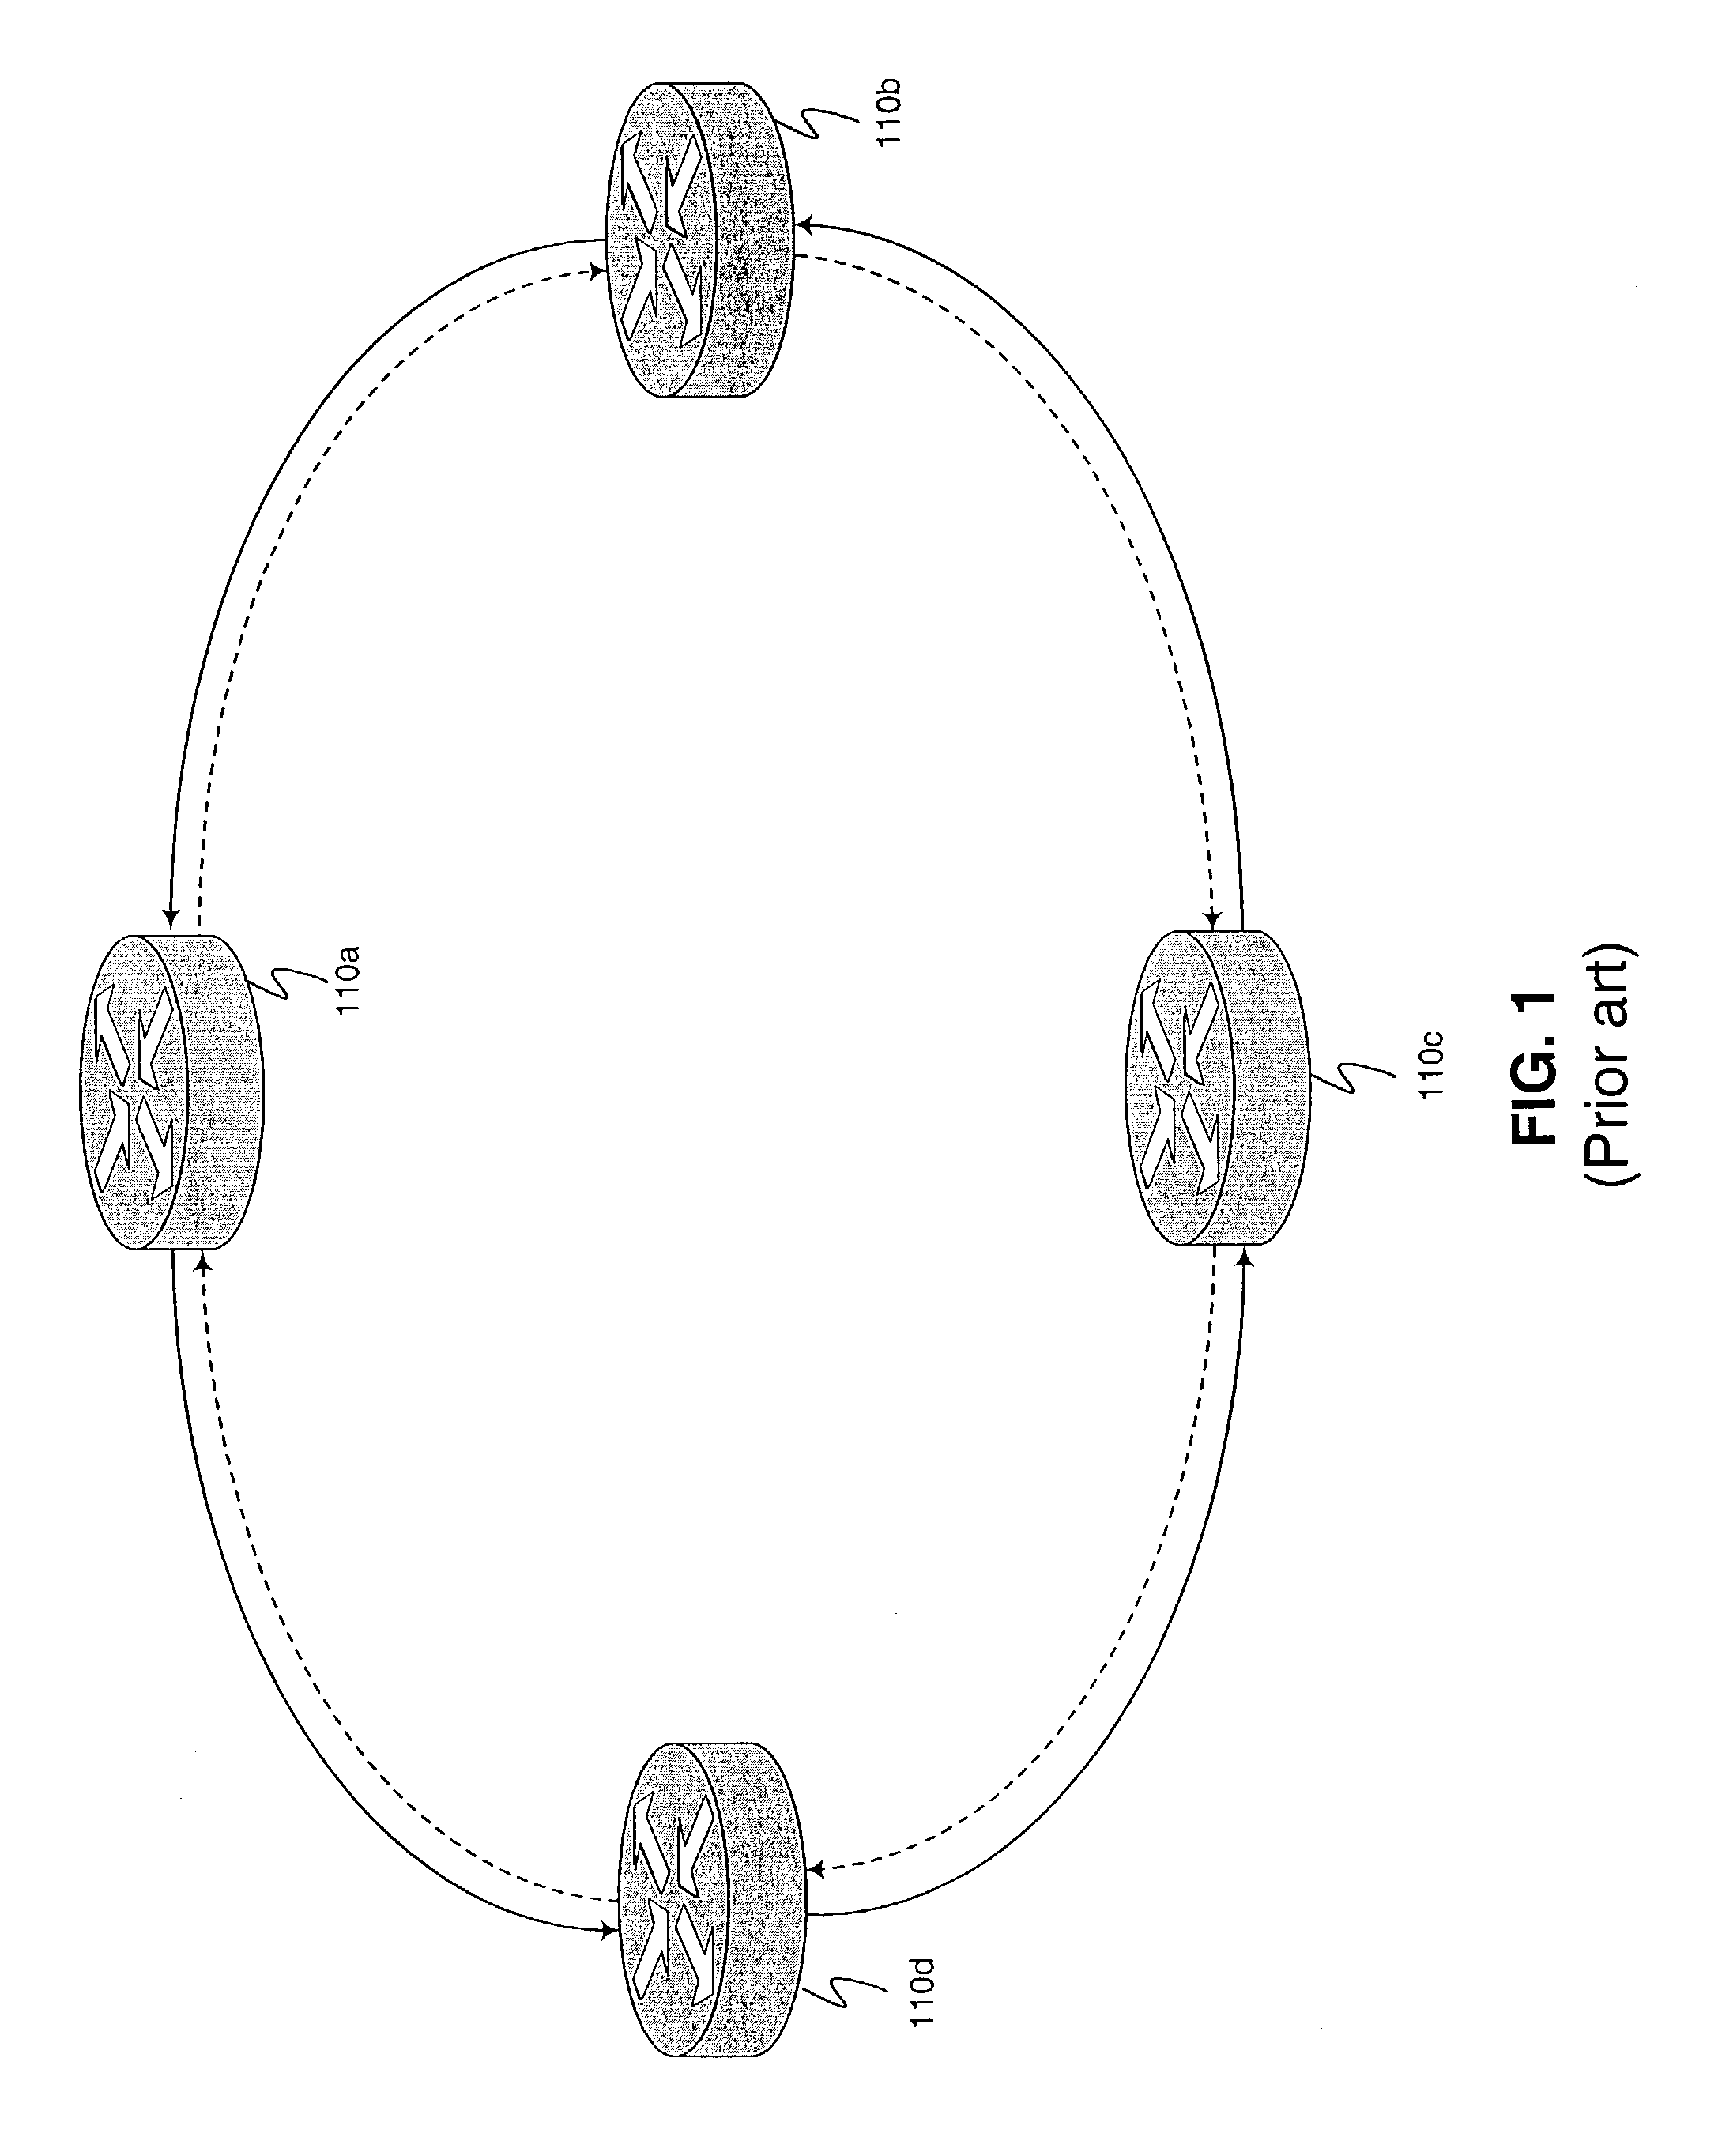 Method and system for allocating traffic demands in a ring network